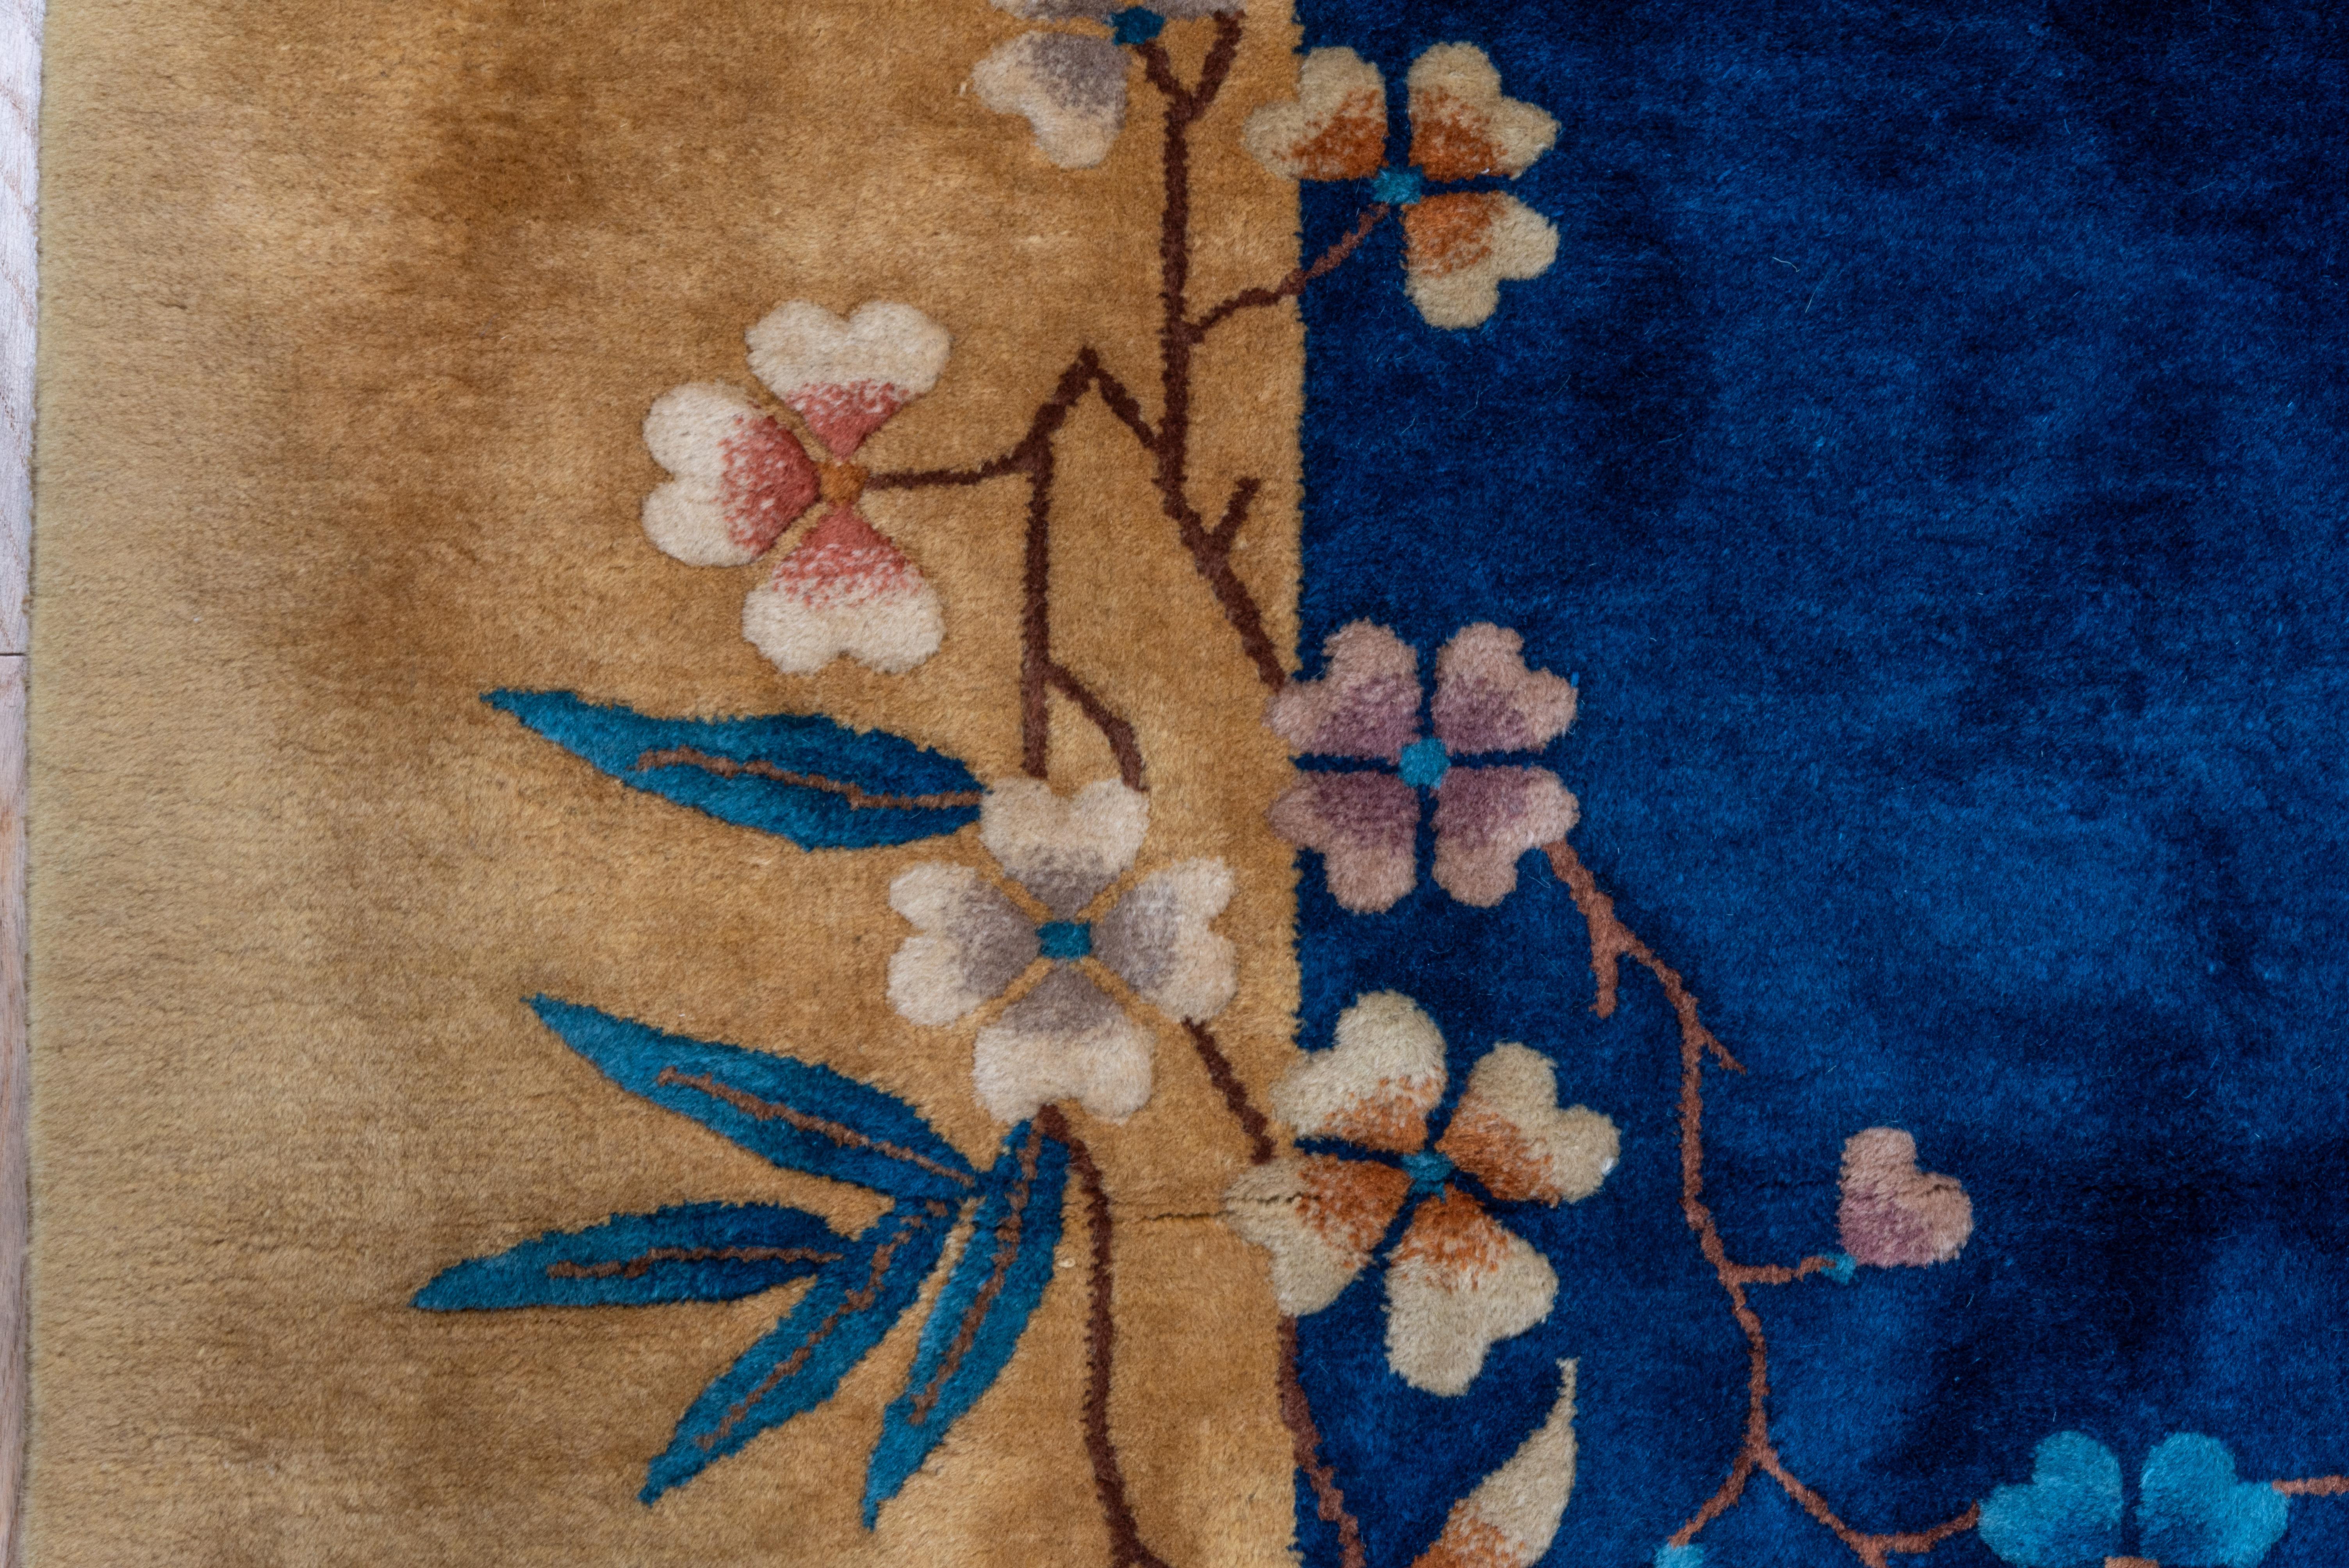 Here is one in an uncommon size, with an asymmetric pattern of floral sprays tying together the dark blue field with the straw border. Each stem shows mixed, different blossoms and leaves, including bamboos in one corner. Many flowers are shaded.